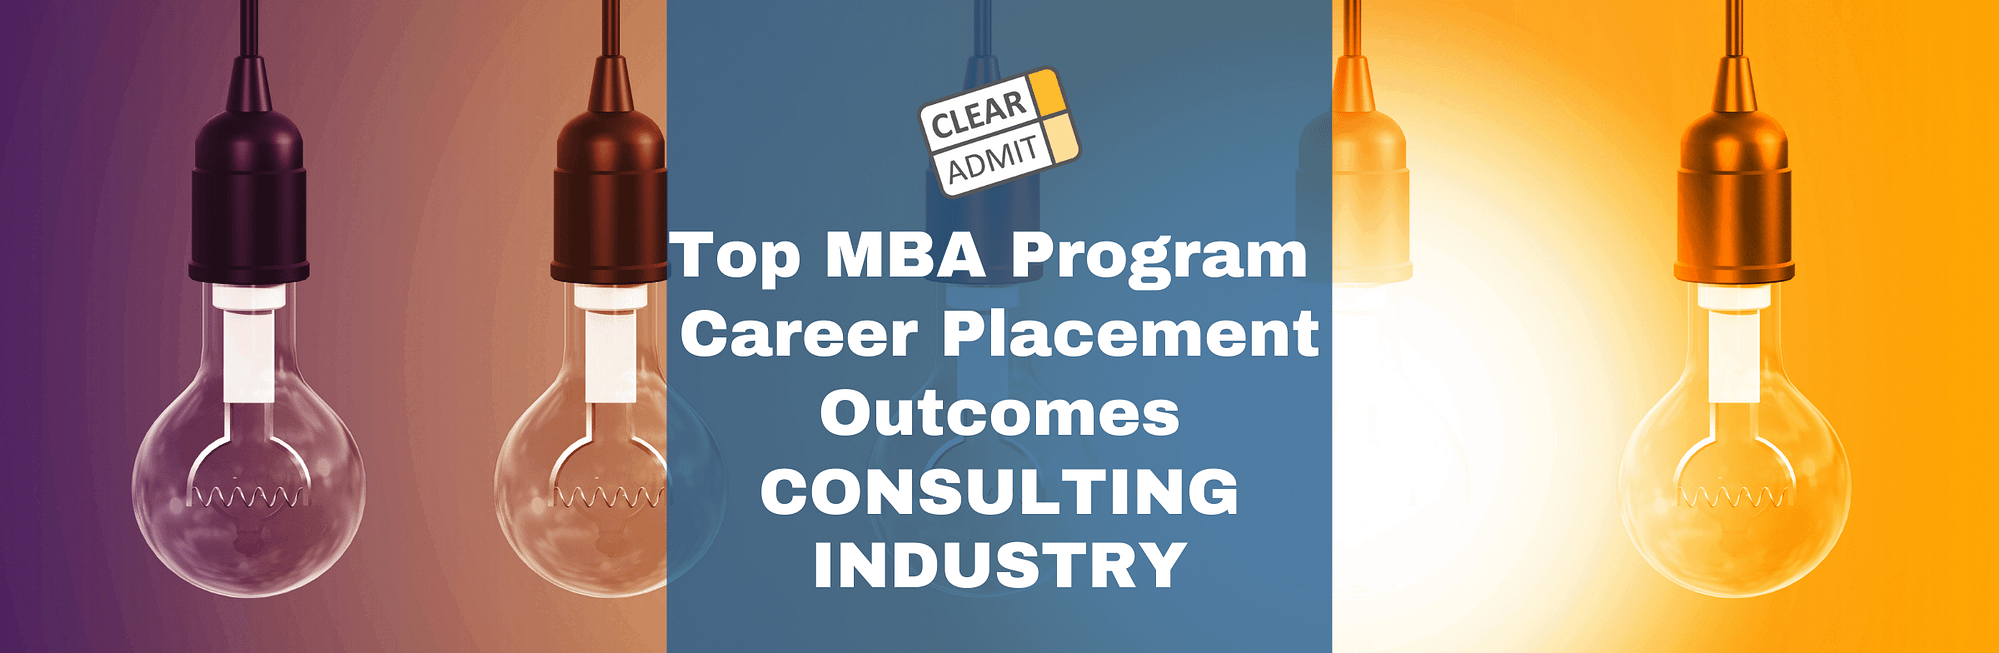 consulting mba jobs